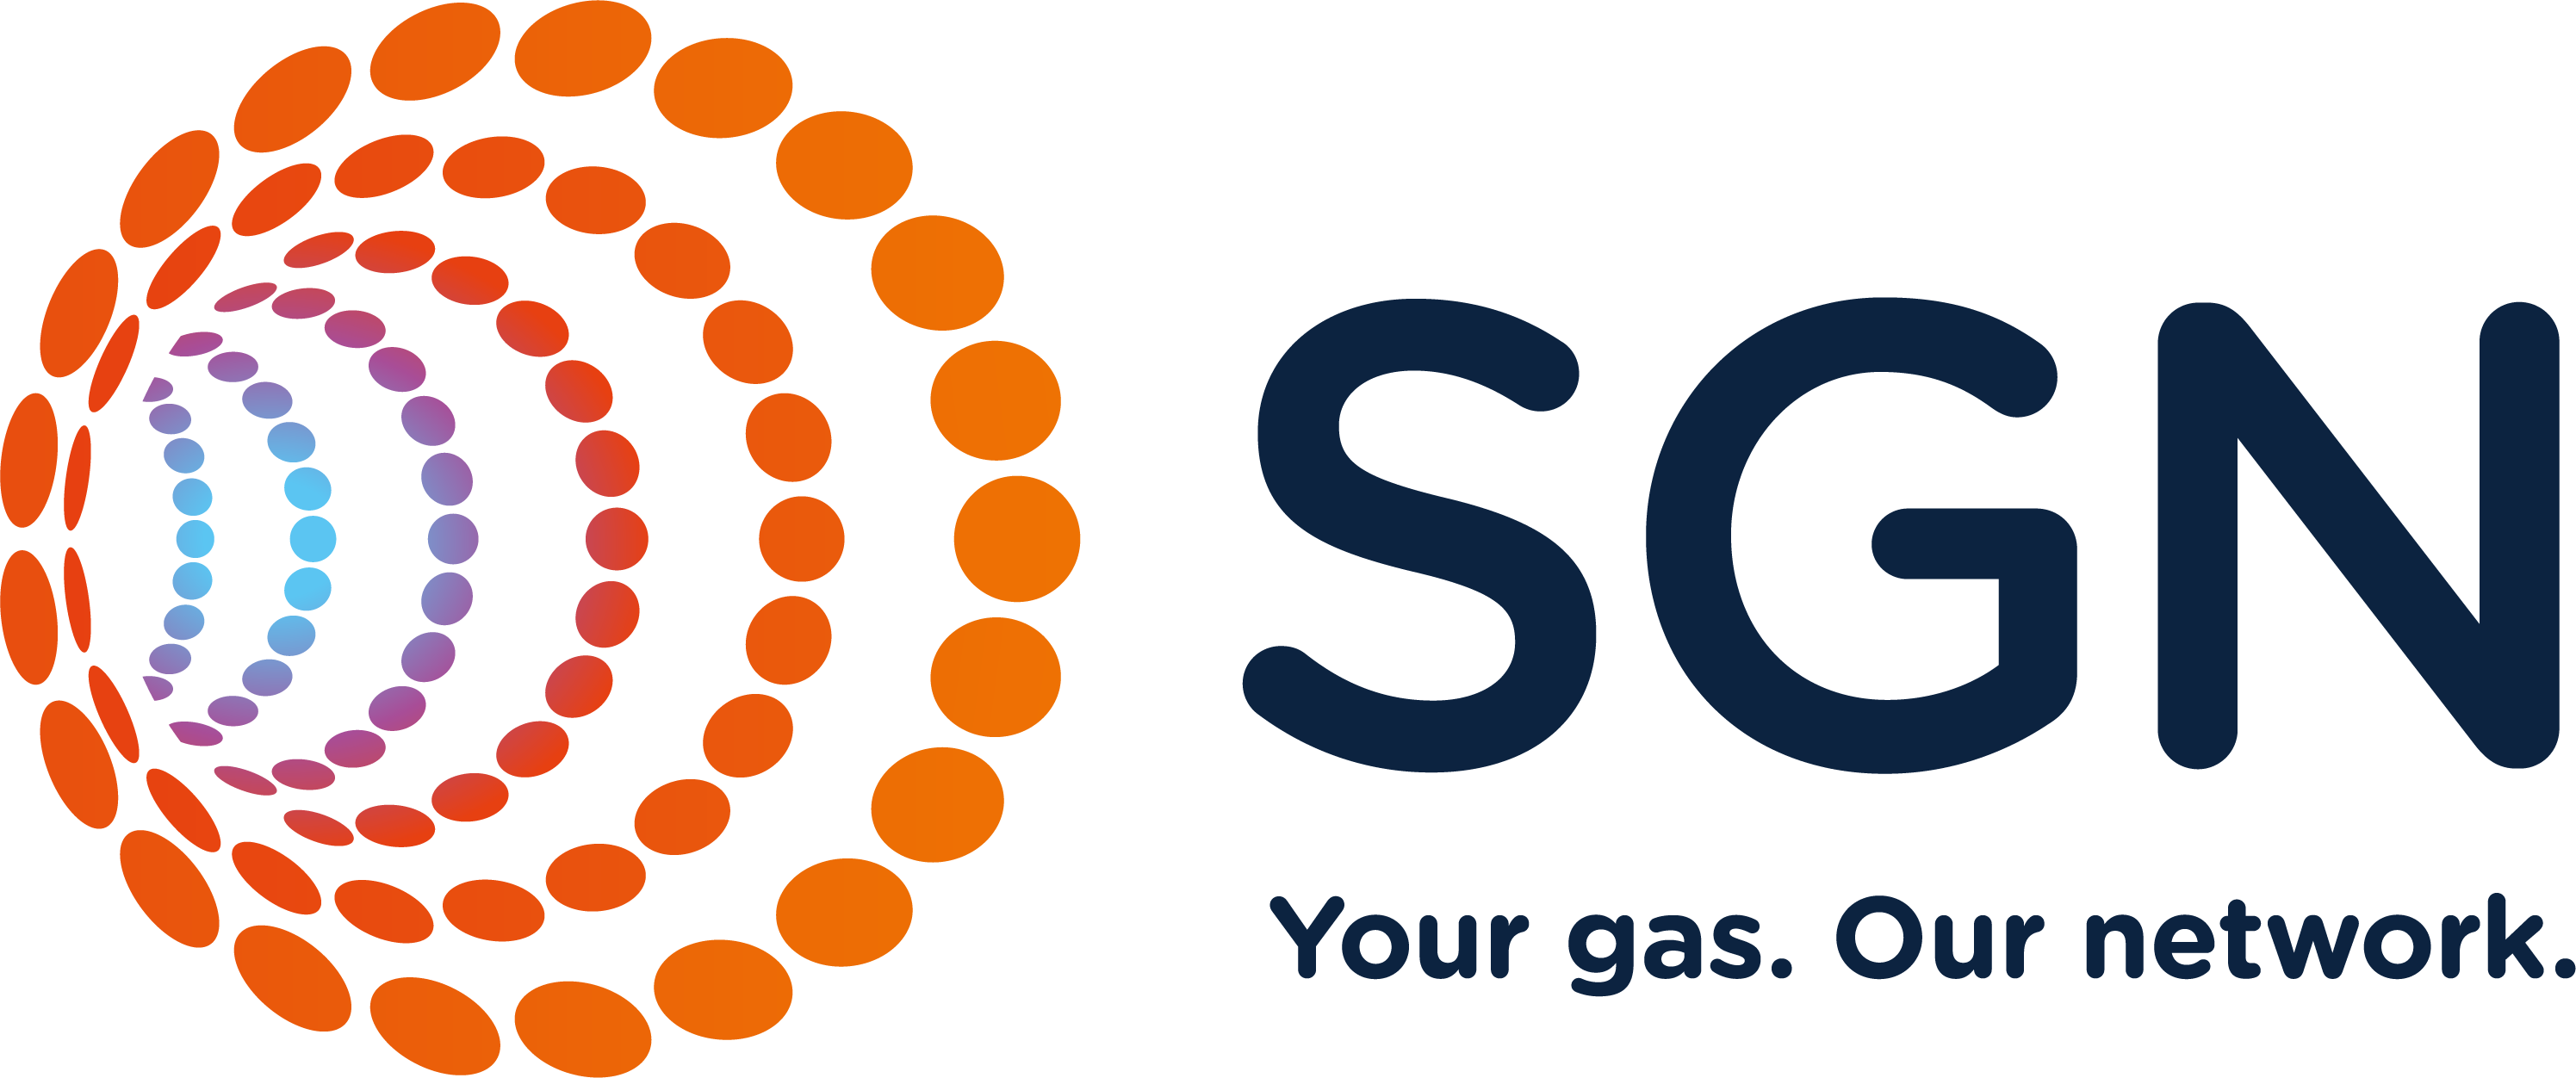 SGN awards CAB network £1m to help provide energy advice